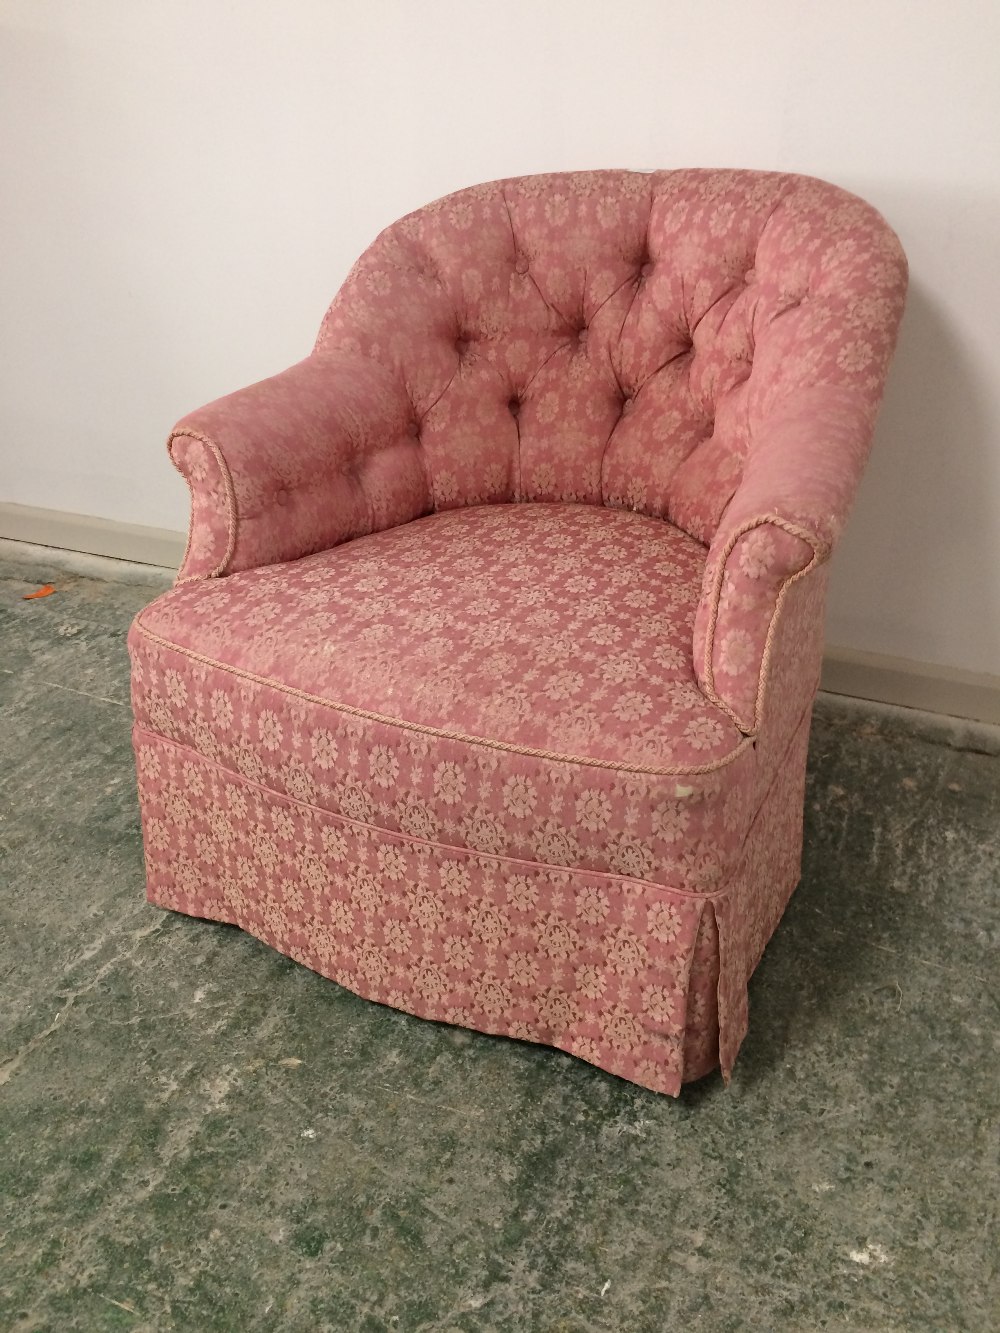 Victorian ladies button back tub chair on turned legs & castors